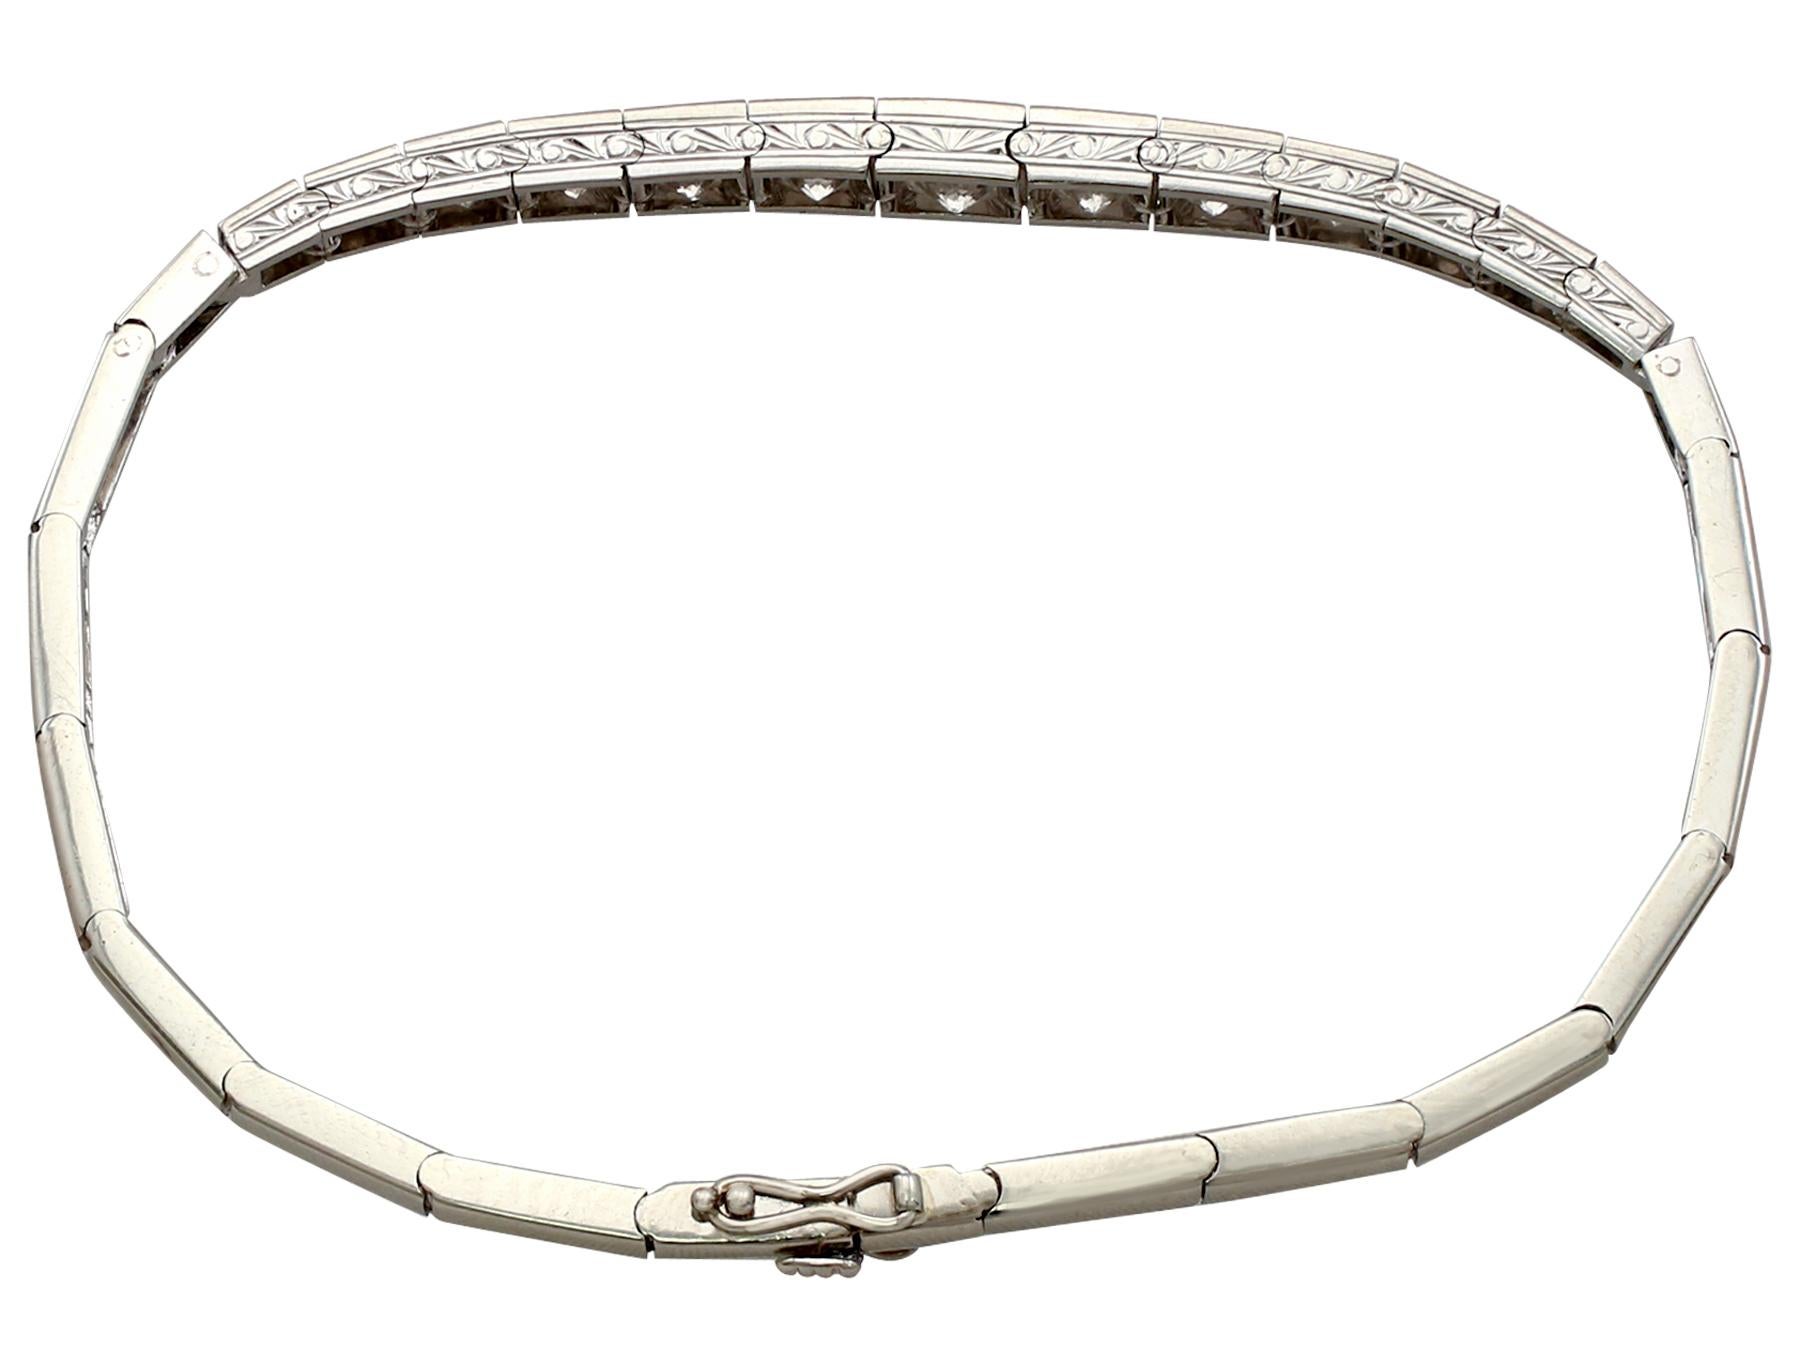 An impressive antique 1930s 1.20 carat diamond and 18 karat white gold bracelet; part of our diverse antique estate jewelry collections.

This fine and impressive diamond bracelet has been crafted in 18k white gold.

The fully articulated, graduated